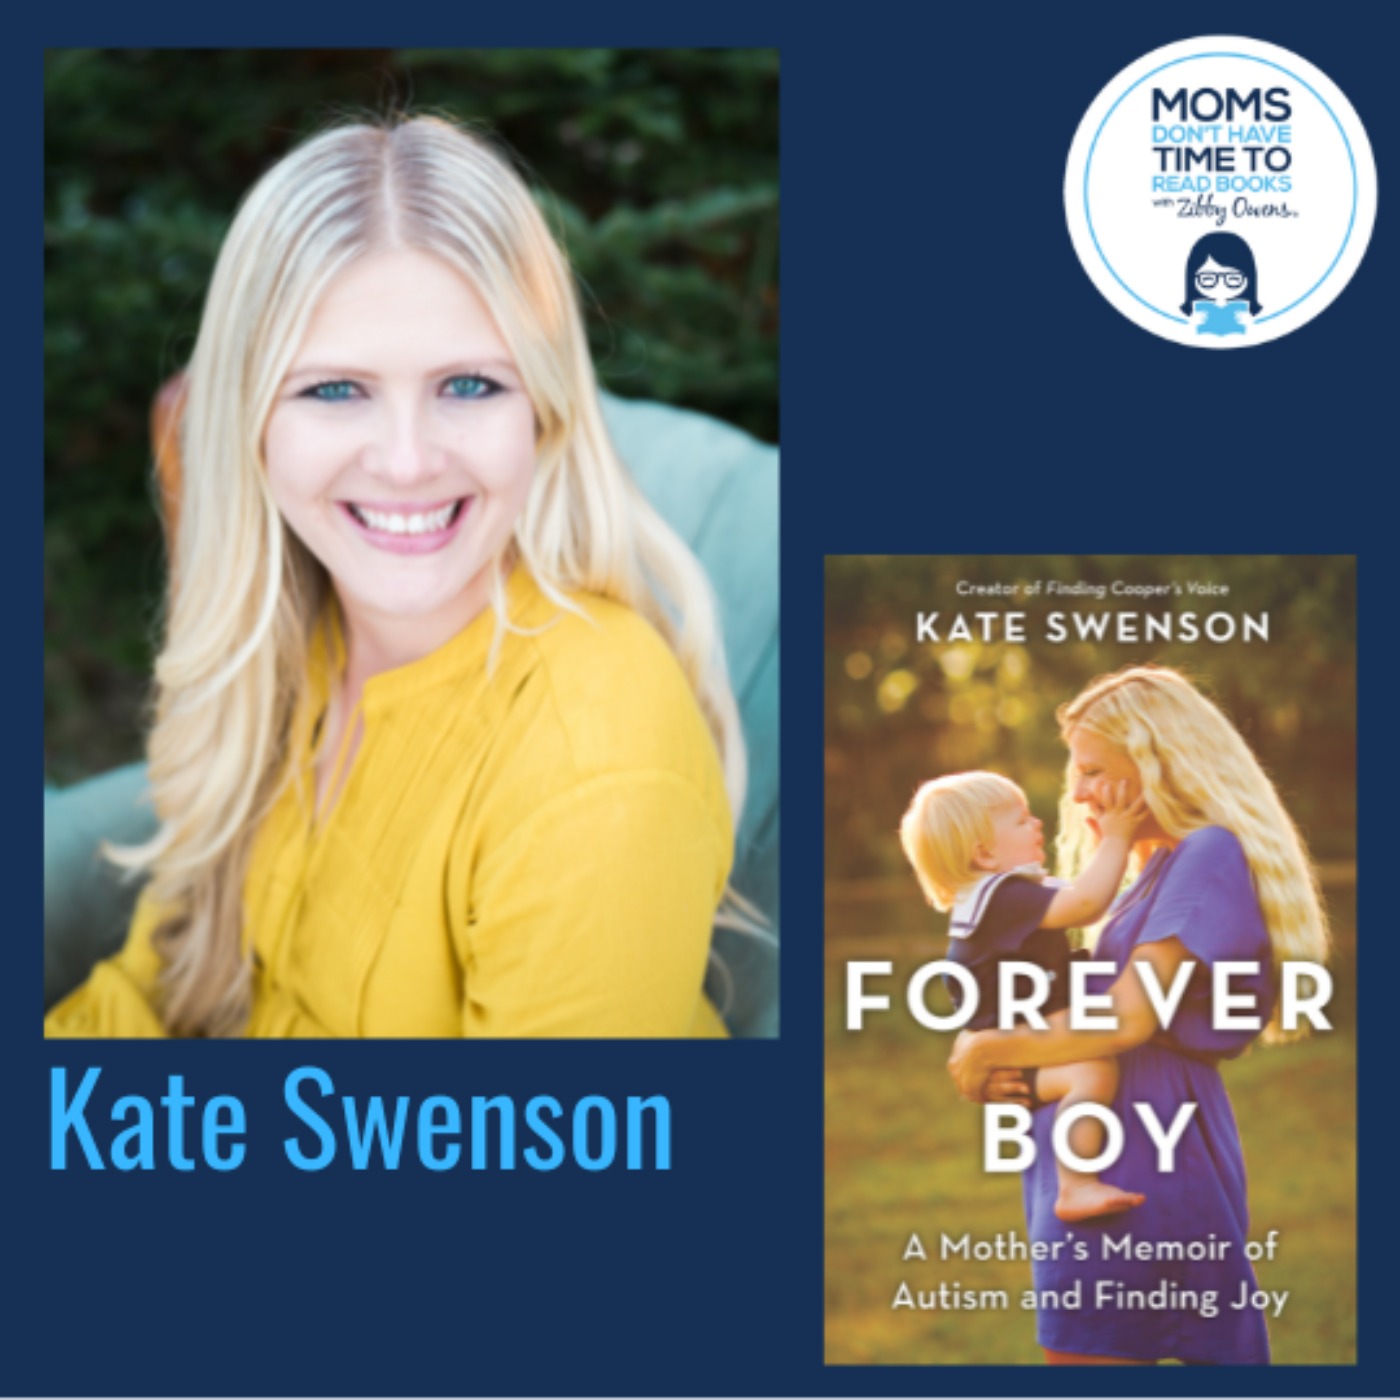 Kate Swenson, FOREVER BOY: A Mother's Memoir of Autism and Finding Joy